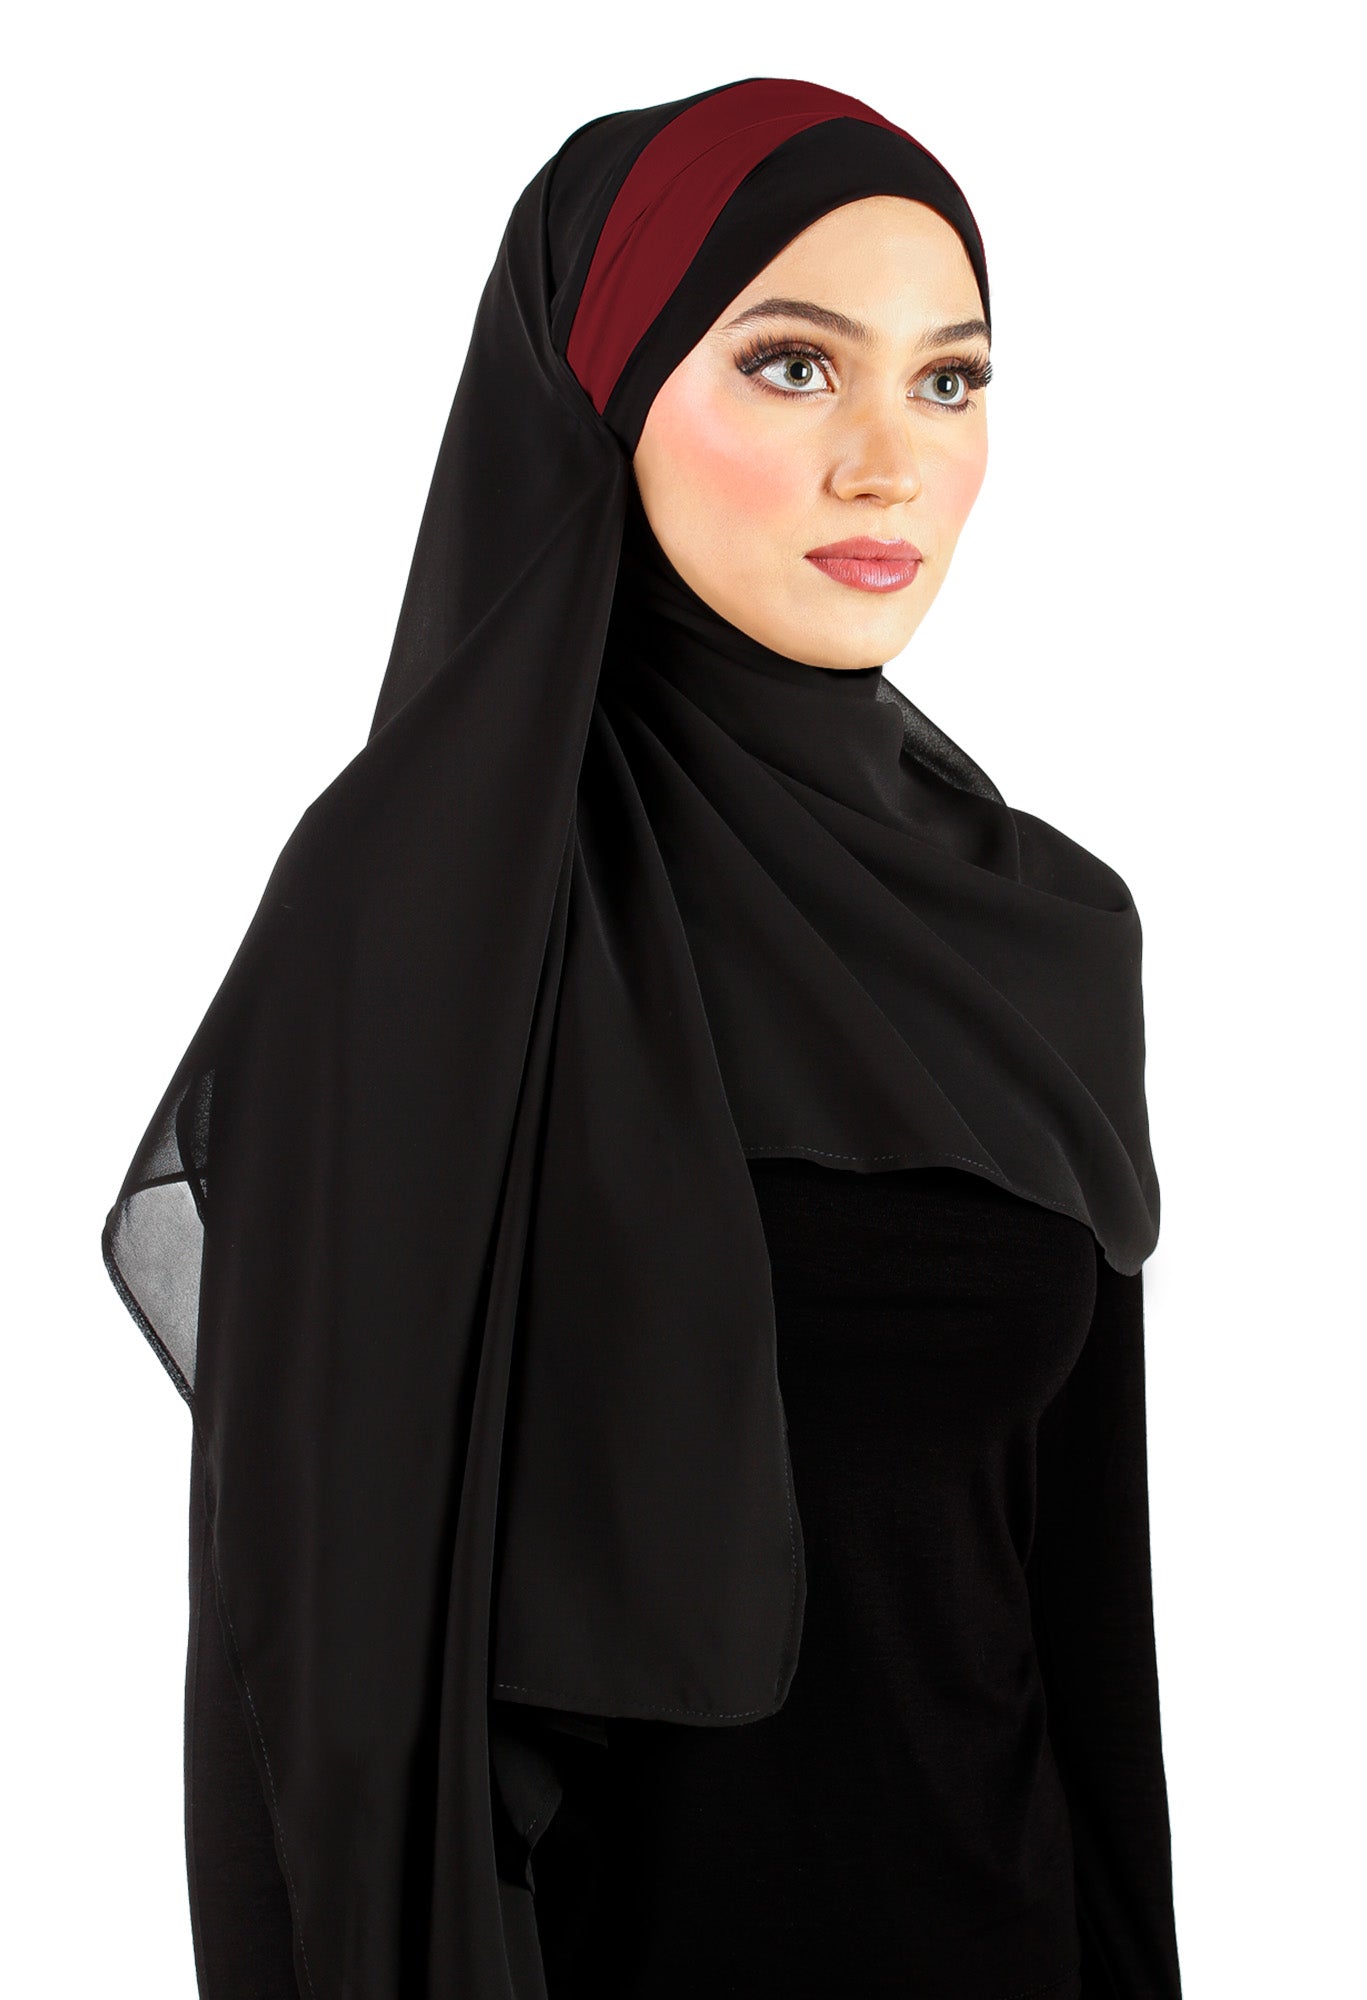 black korean chiffon headscarf wrap has a maroon stripe on the caplet with 2 sashes that tie back behind the head to secure the hijab